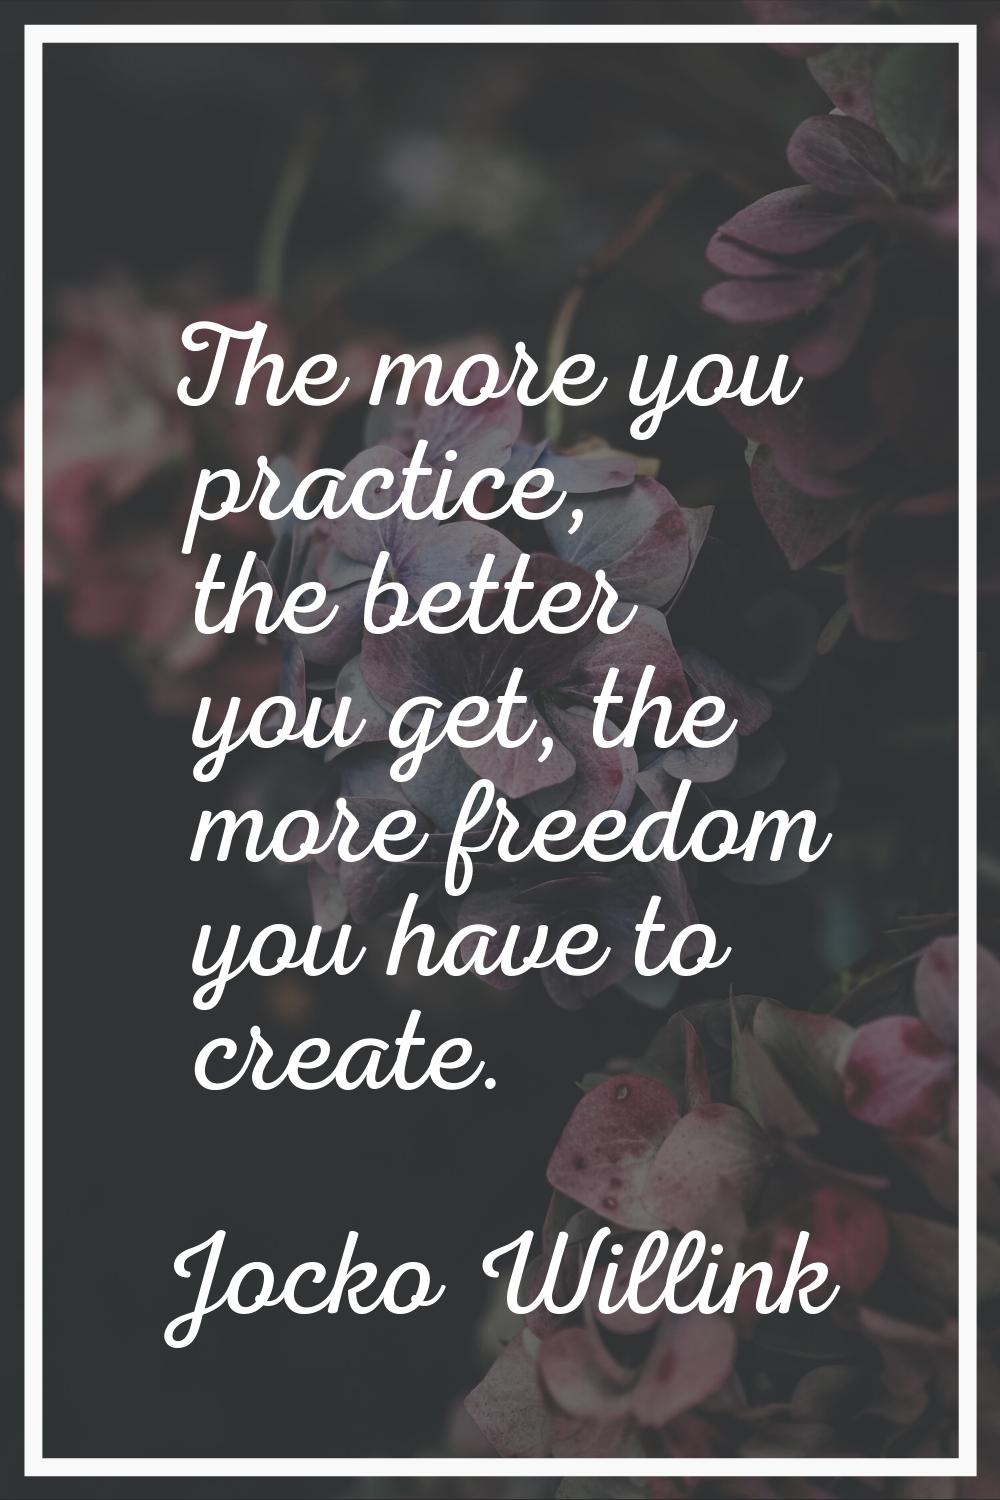 The more you practice, the better you get, the more freedom you have to create.